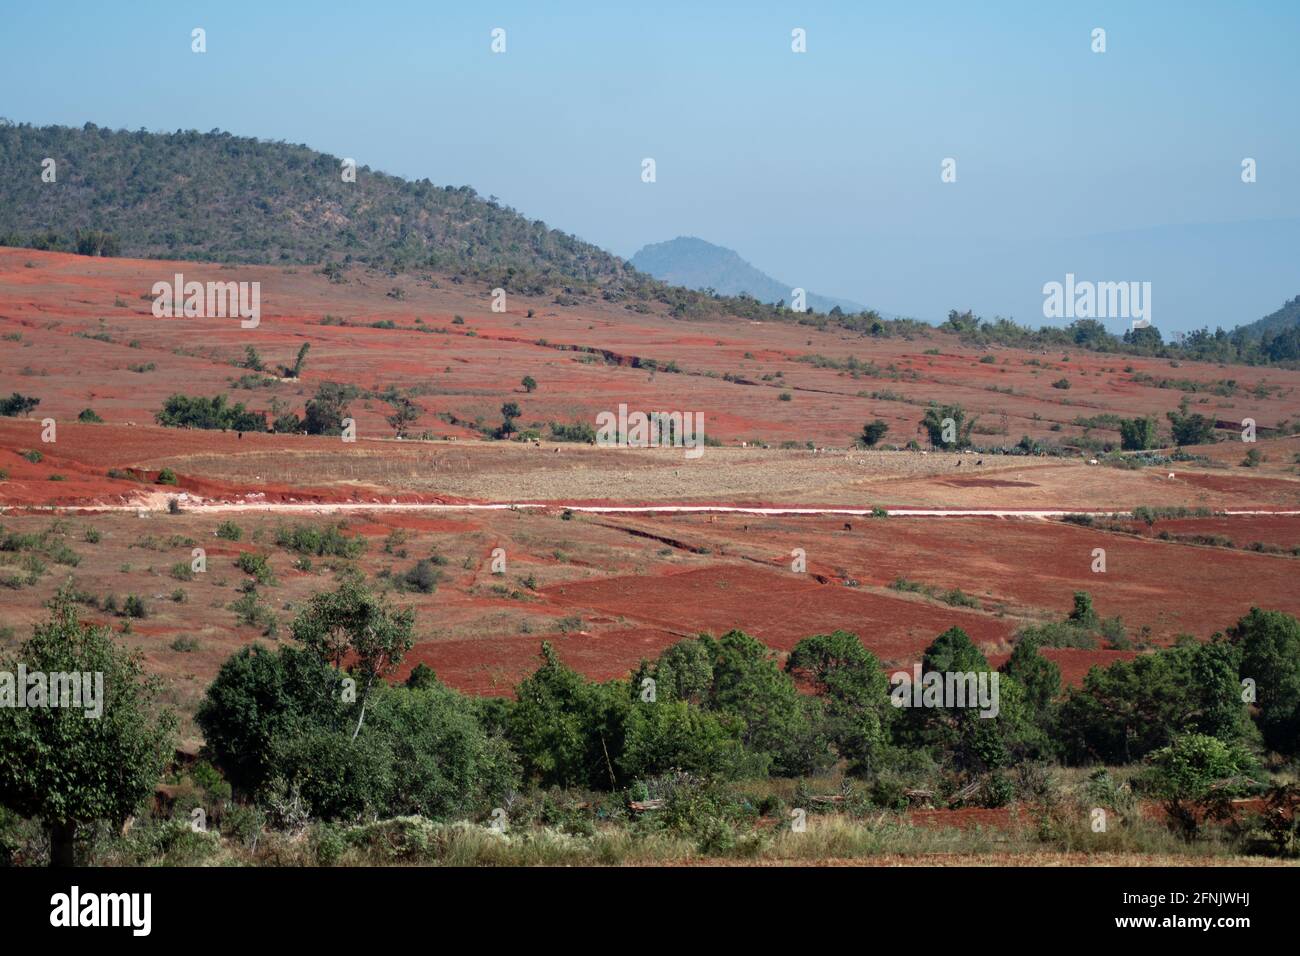 Red chili drying in the sun on massive farm land fields on a hillside between Kalaw and Inle Lake, Shan state, Myanmar Stock Photo